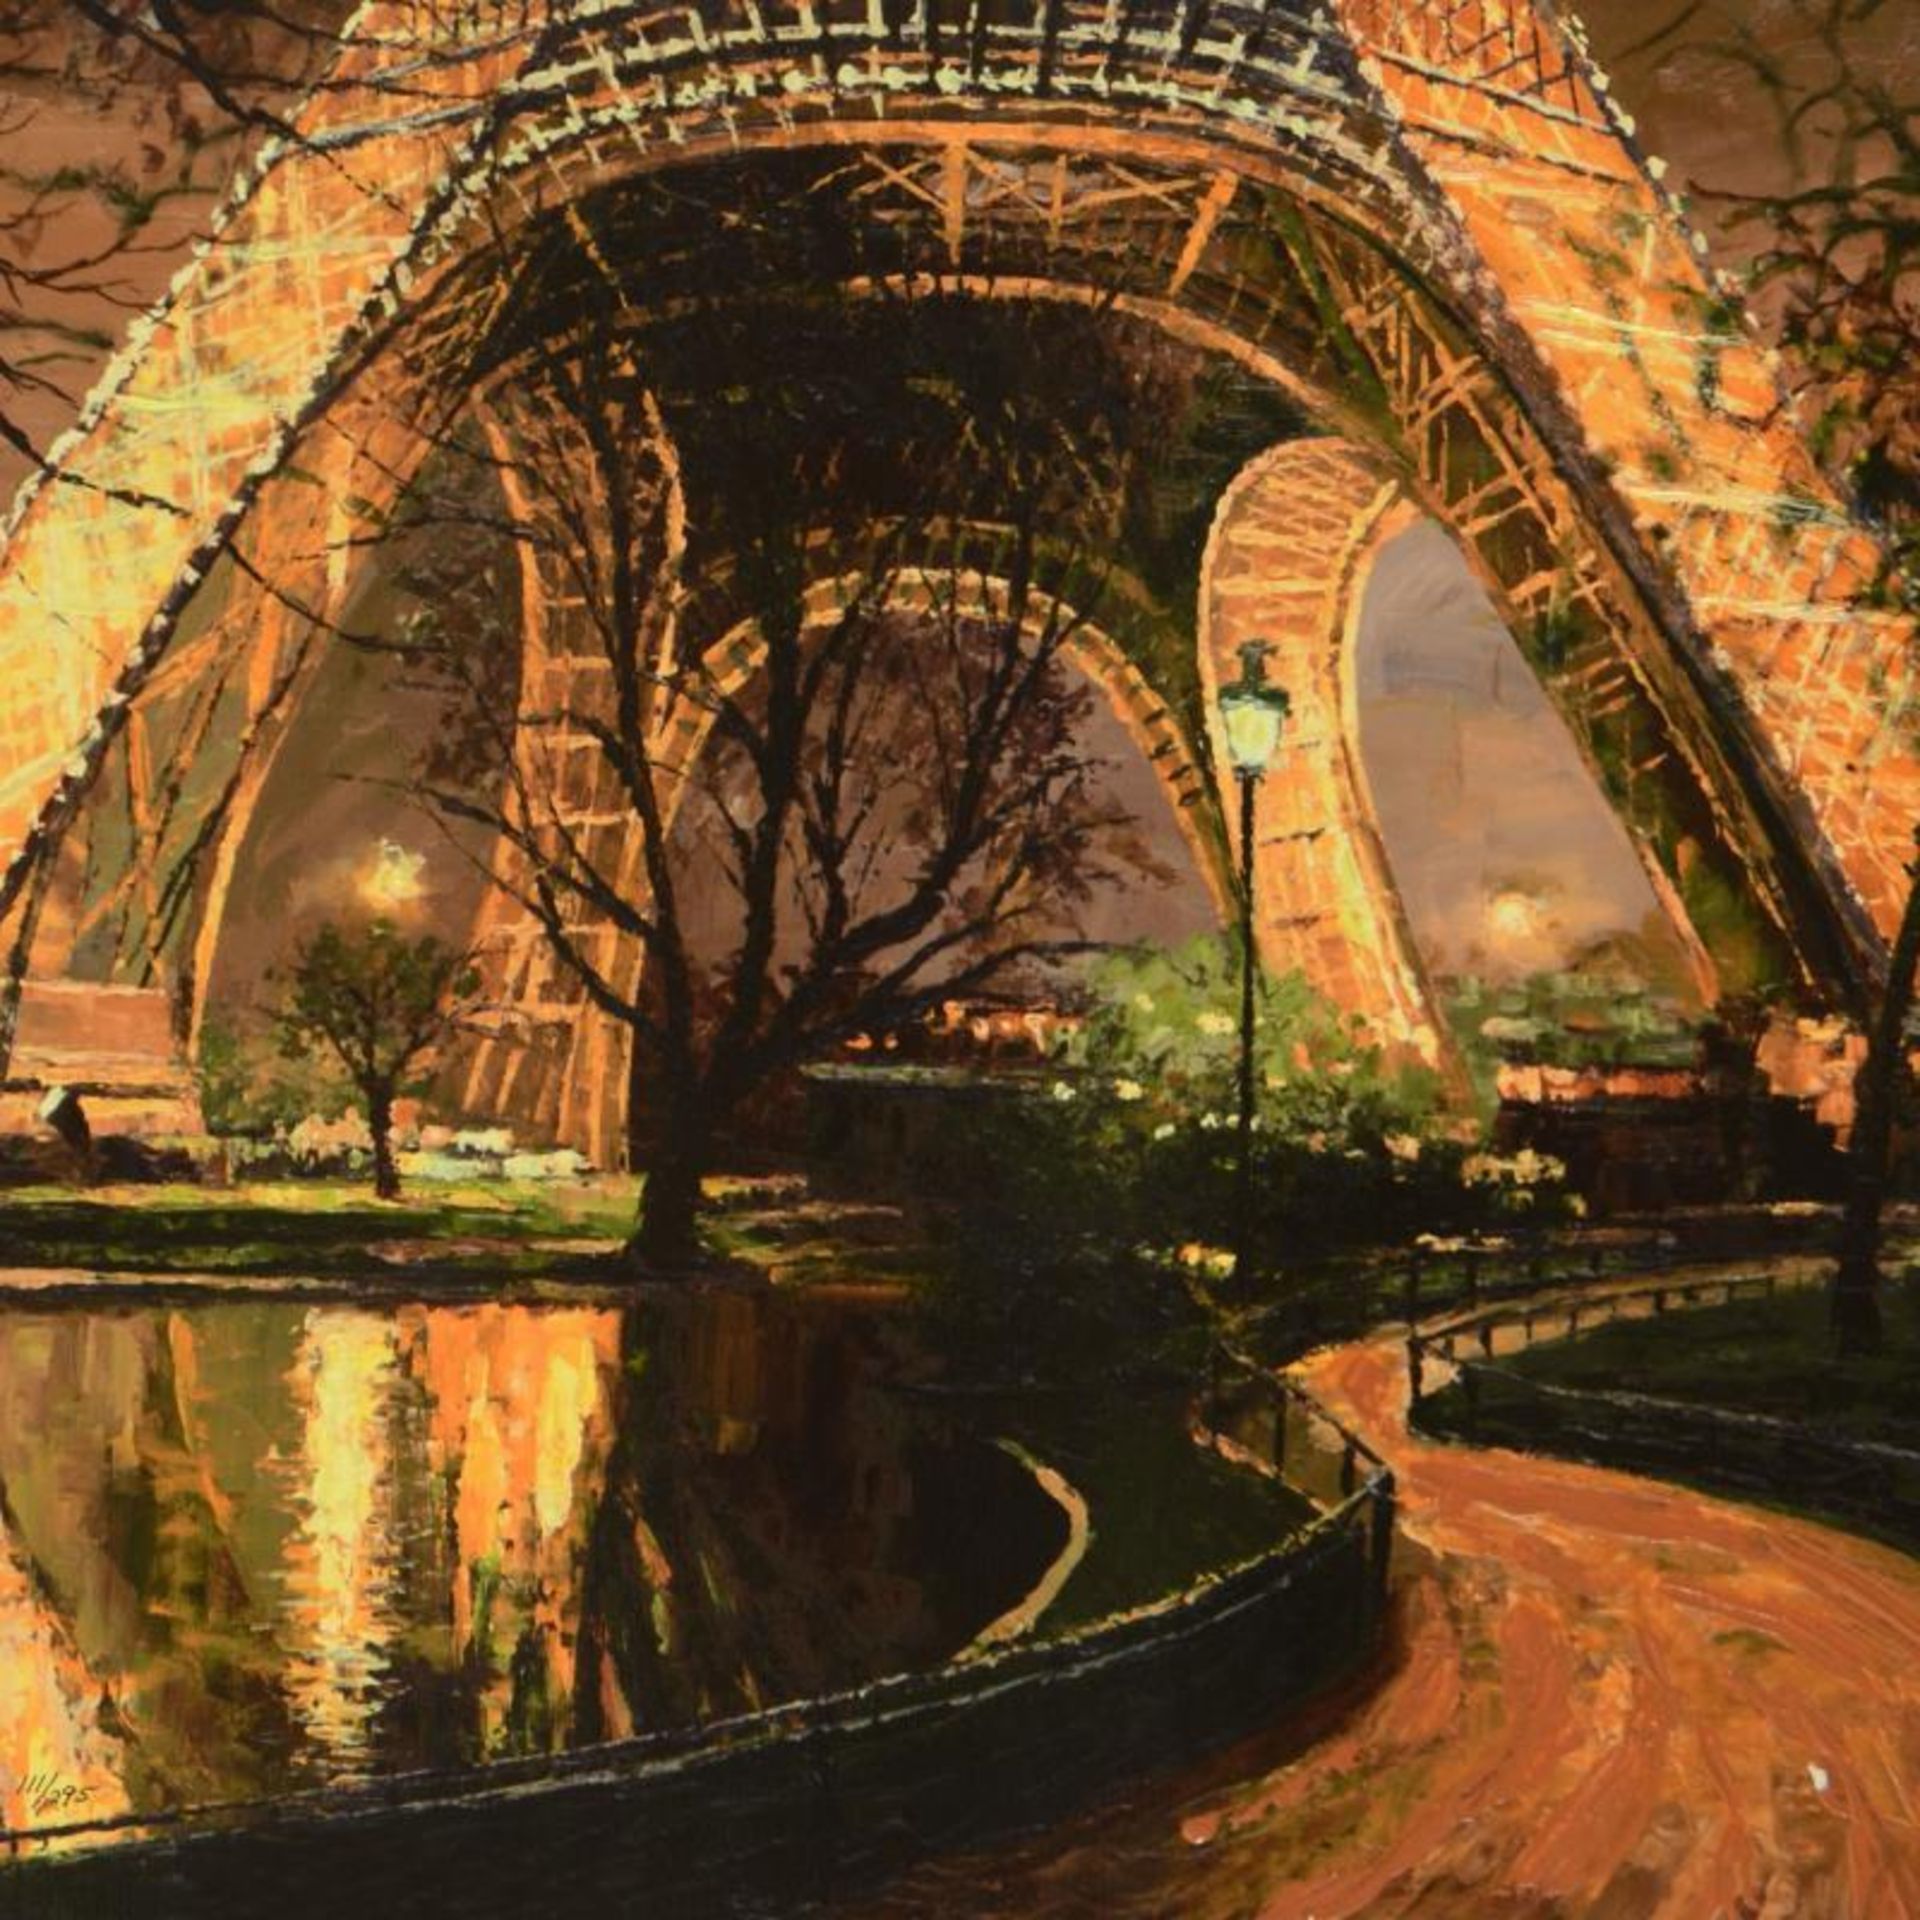 Twilight At The Eiffel Tower by Behrens (1933-2014) - Image 2 of 2